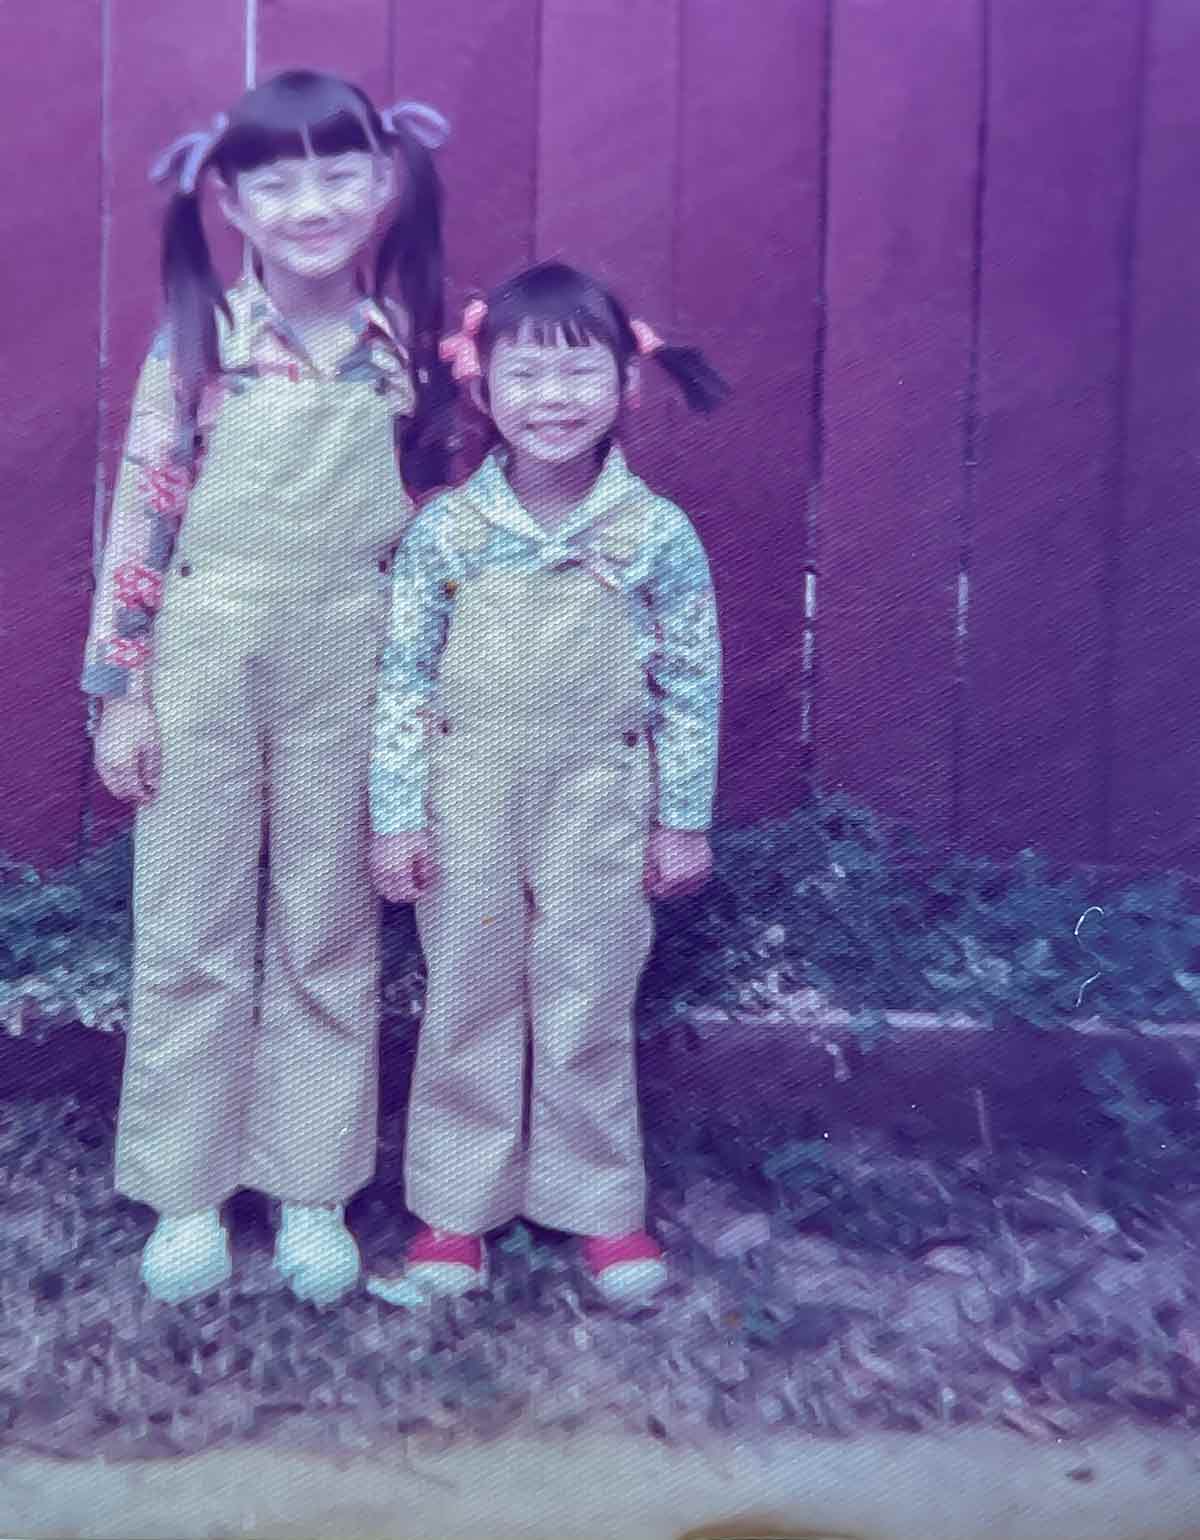 Kim Sunée posing with her sister for a photo as a child.